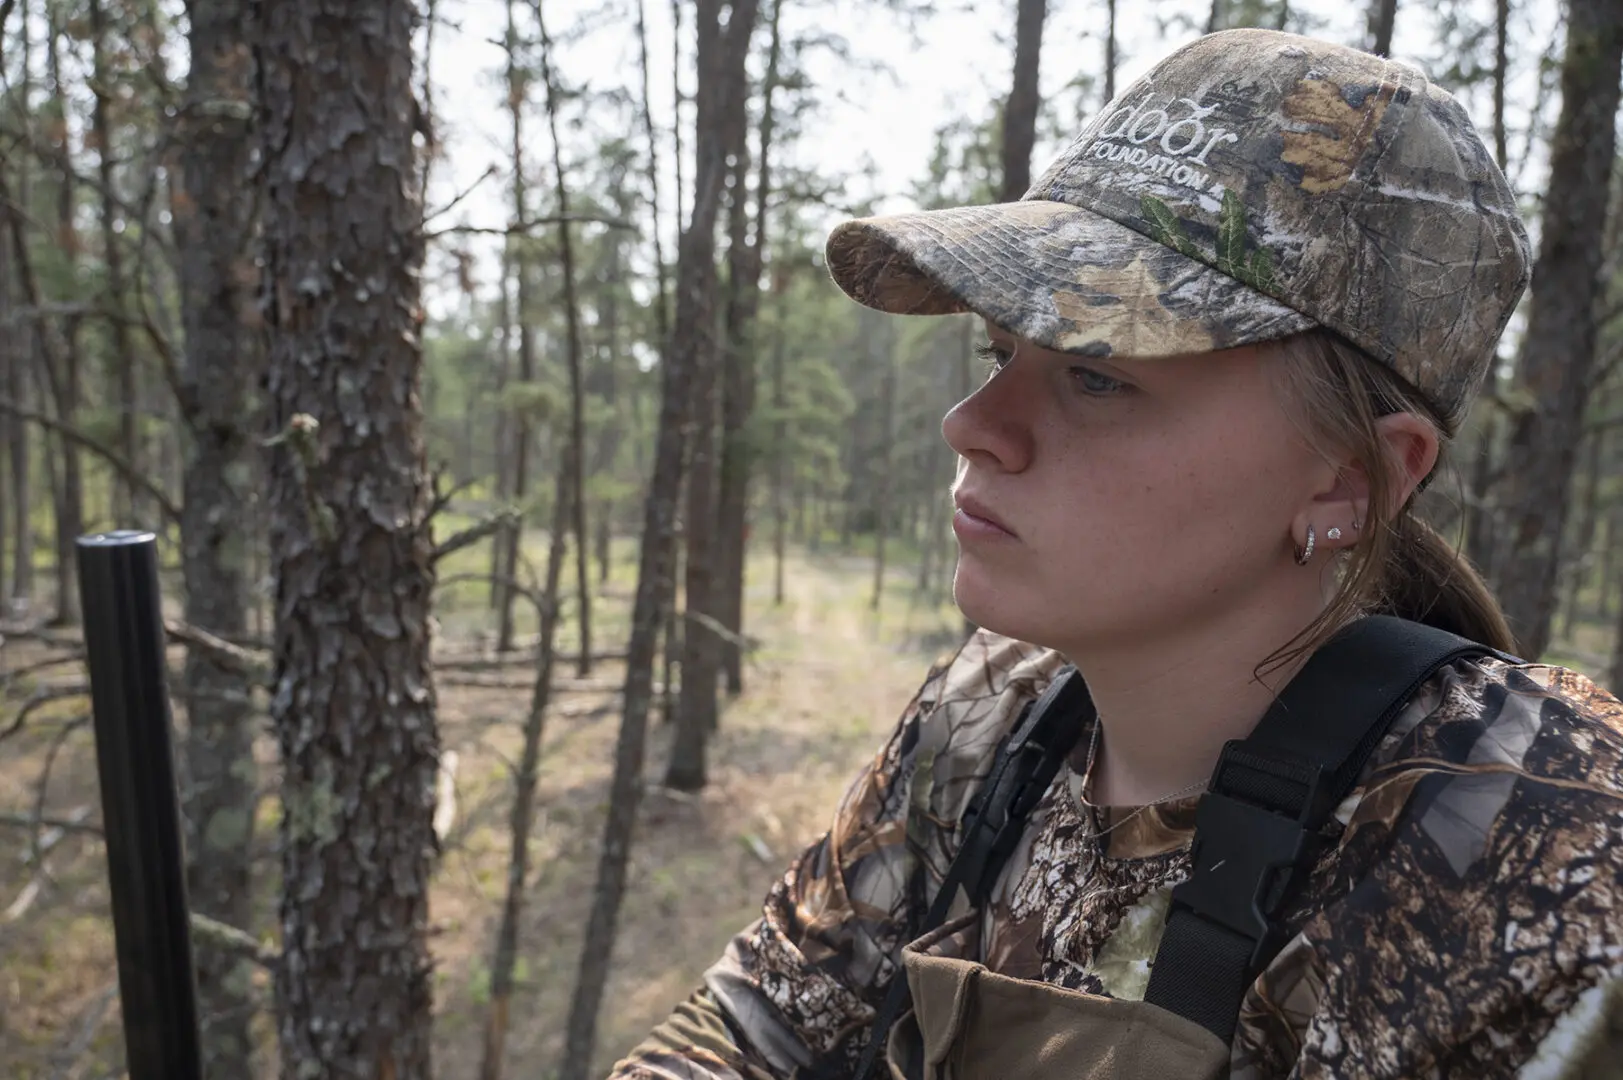 A woman in camouflage hat looking out at trees.